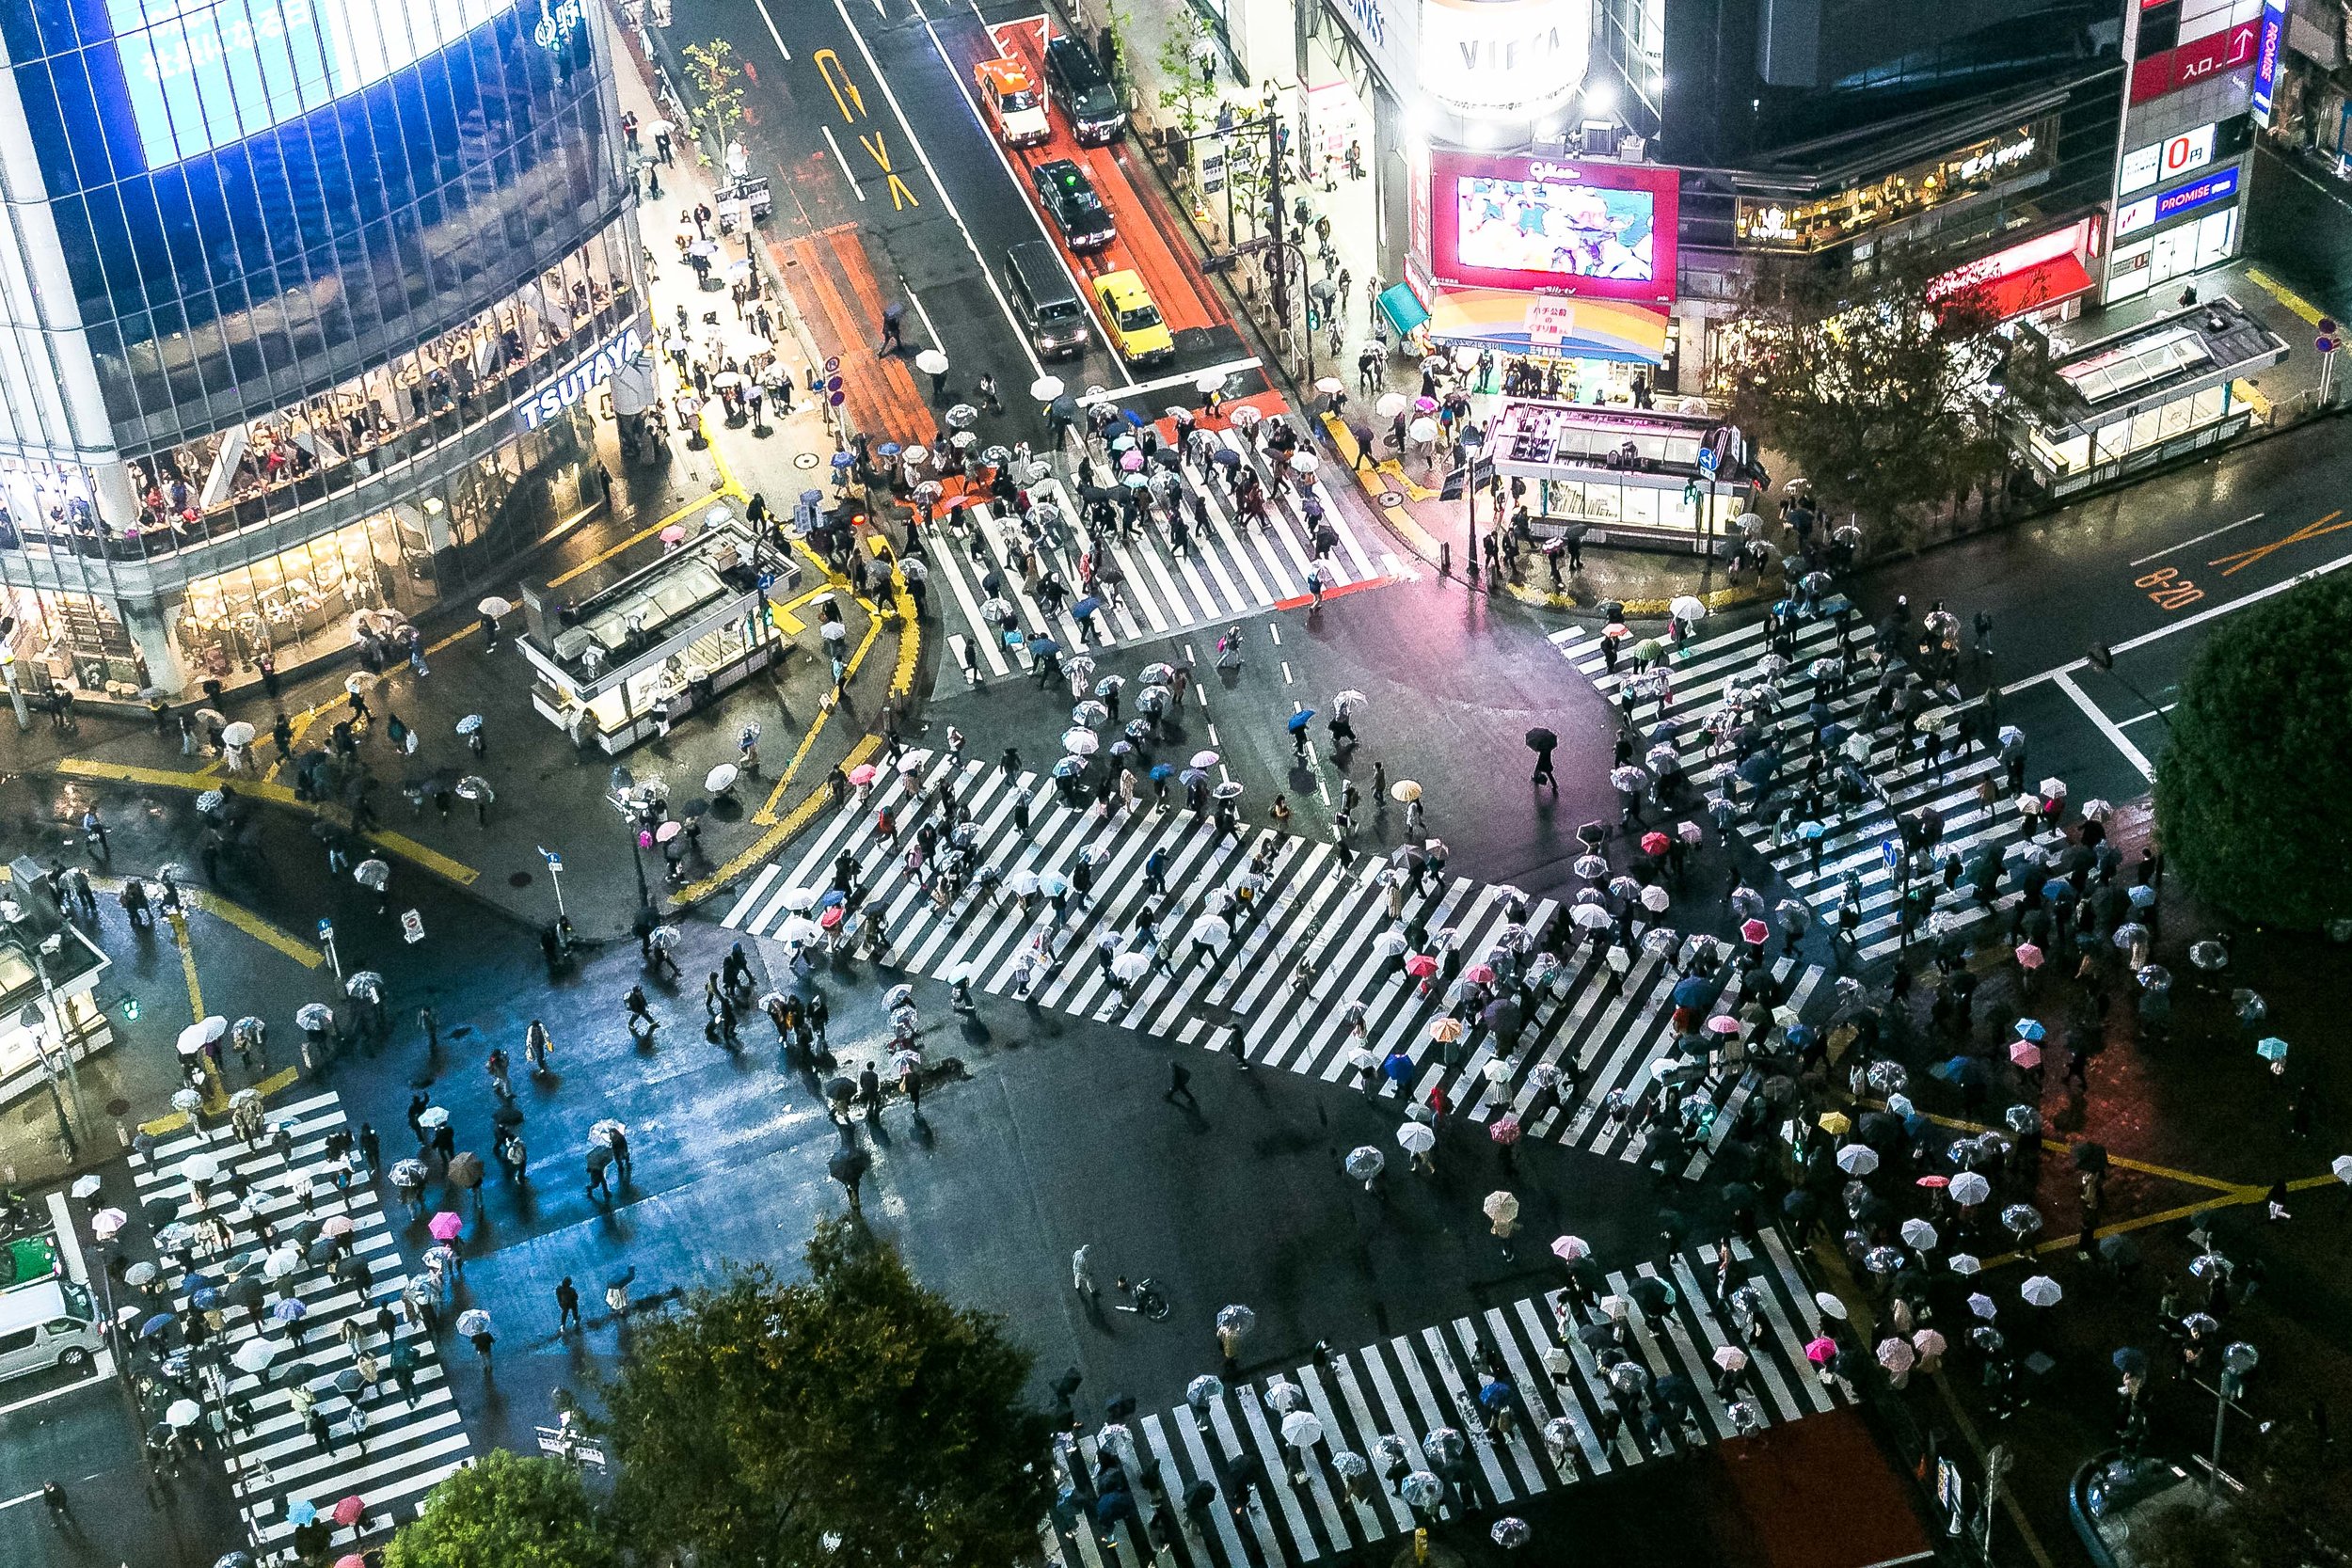 Best Photo Spots Shibuya Crossing In Tokyo Where To Next Budget Travel Tips Solo Female Travel Help Travel Guides Travel Inspiration Travel Photography